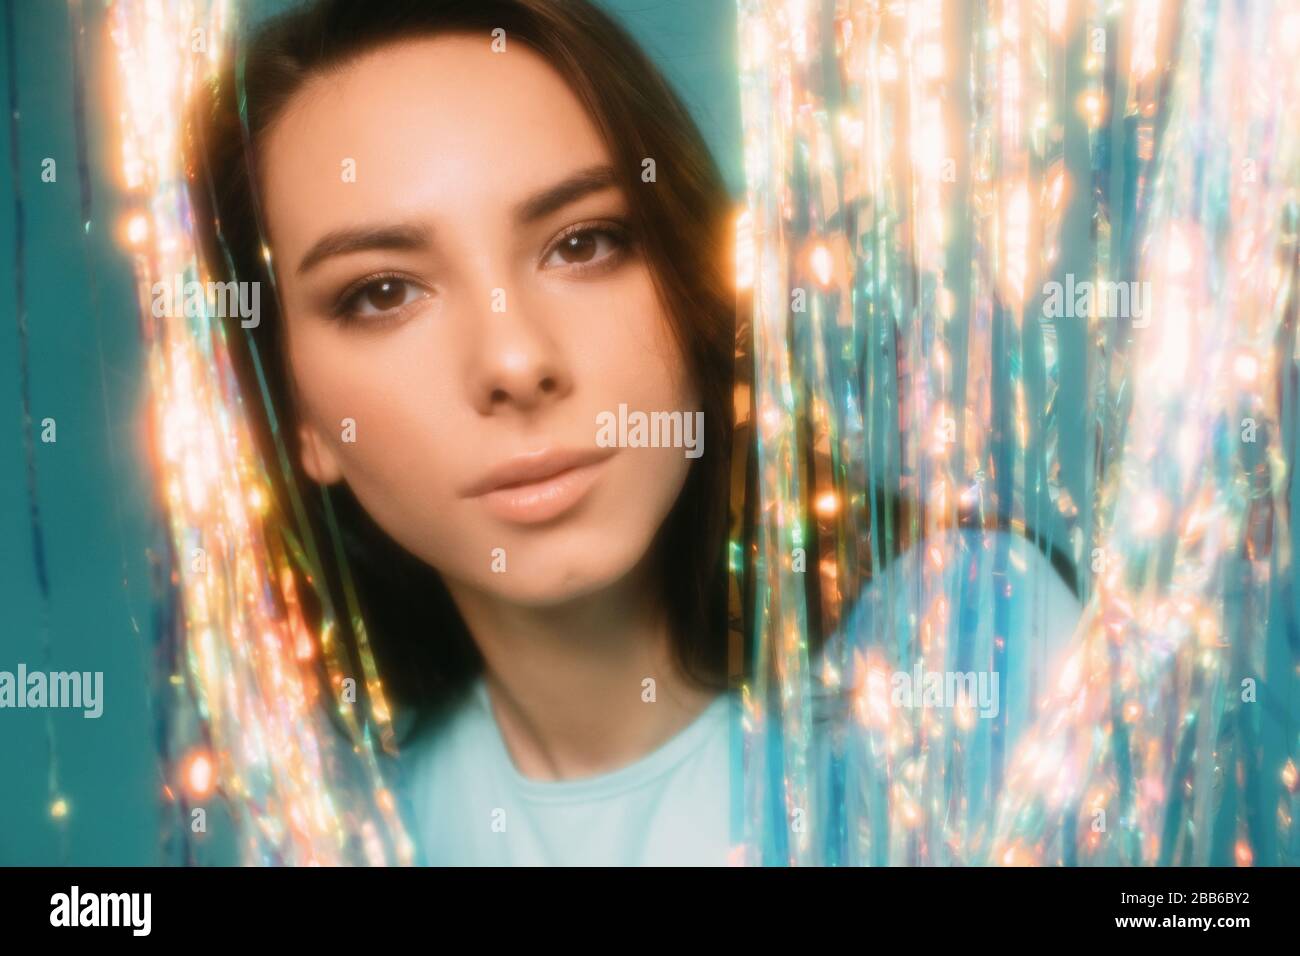 Portrait of a beautiful woman looking through a tinsel curtain Stock Photo